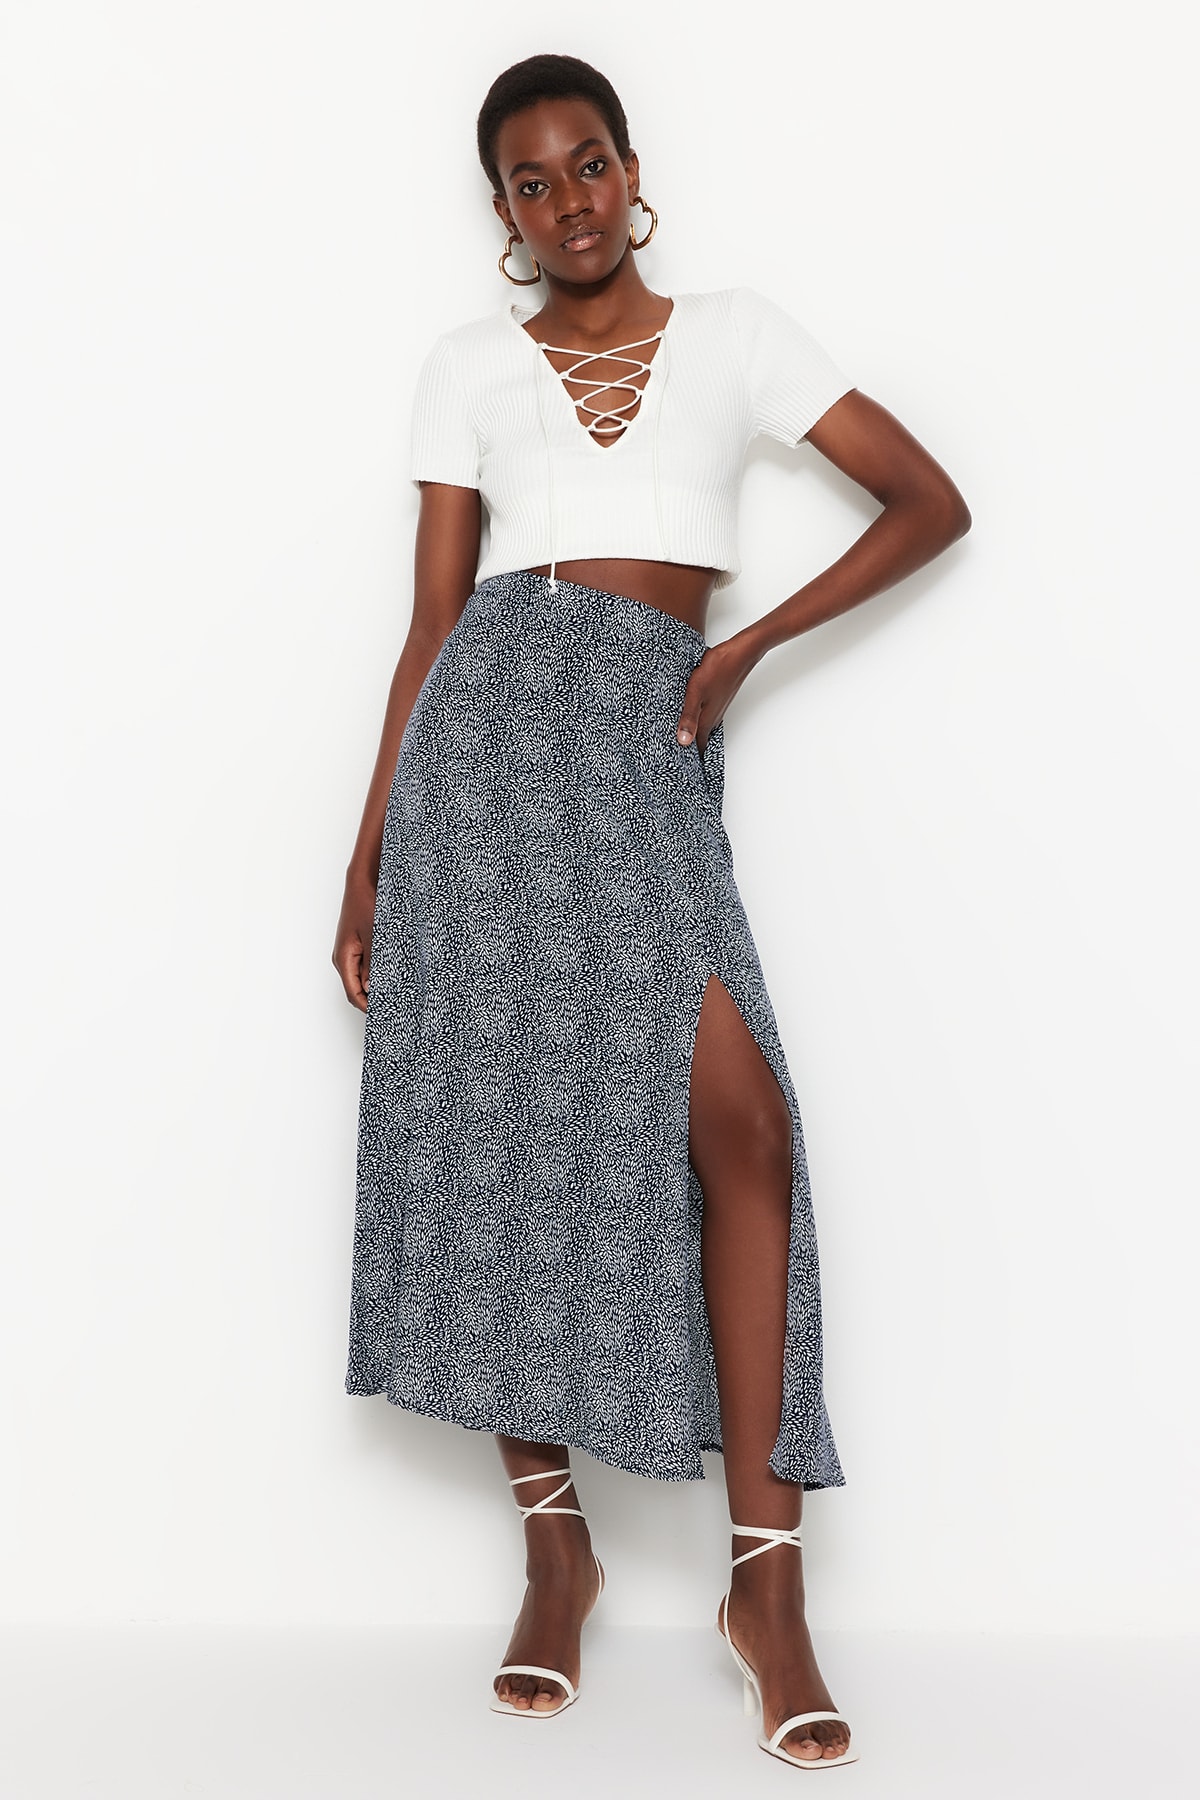 Trendyol Black Midi Woven Skirt with a Slit Detail and Floral Pattern in Viscose Fabric